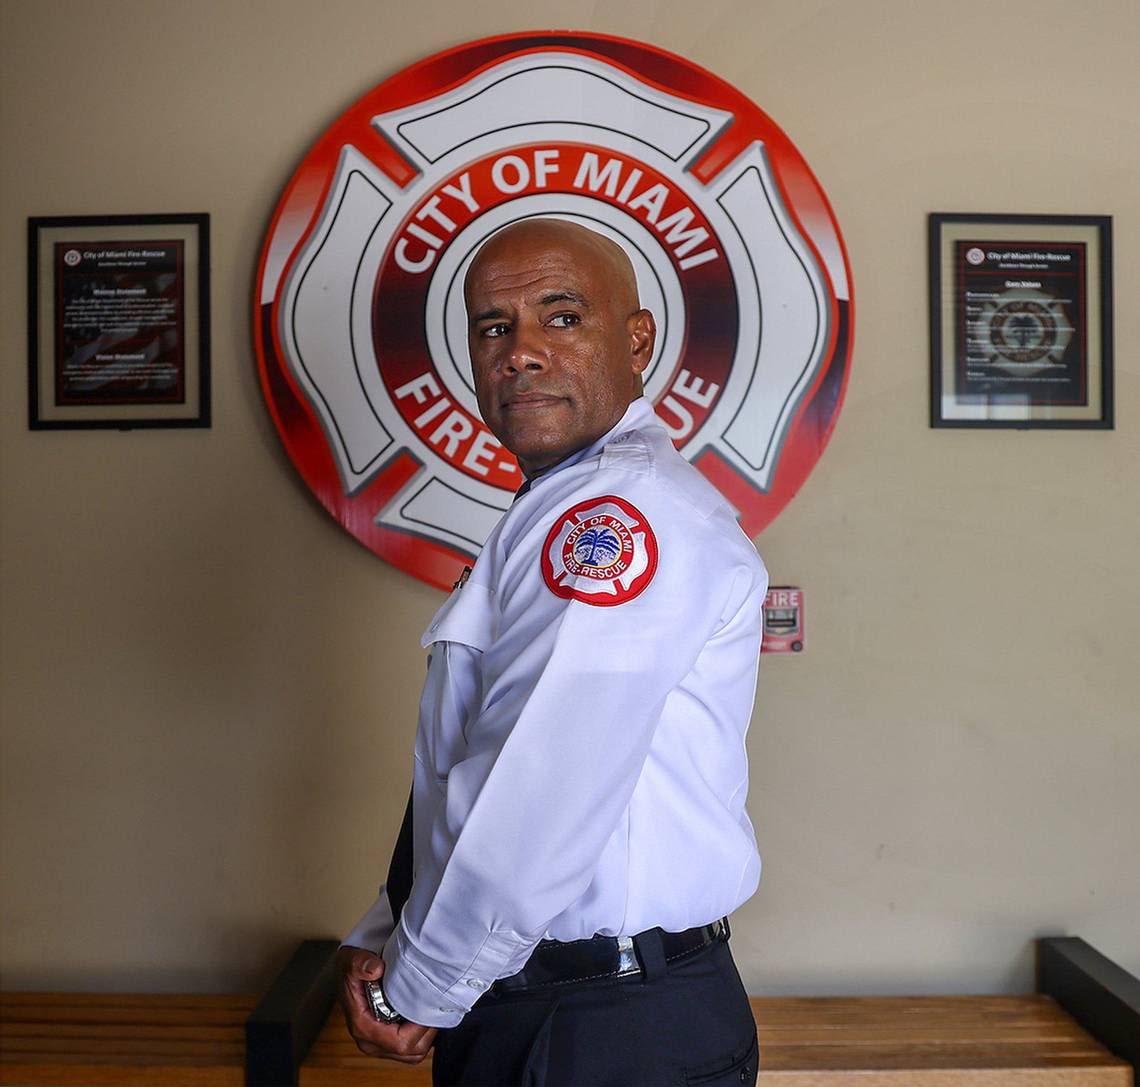 After 35 years of service, the face of Miami’s fire department has retired